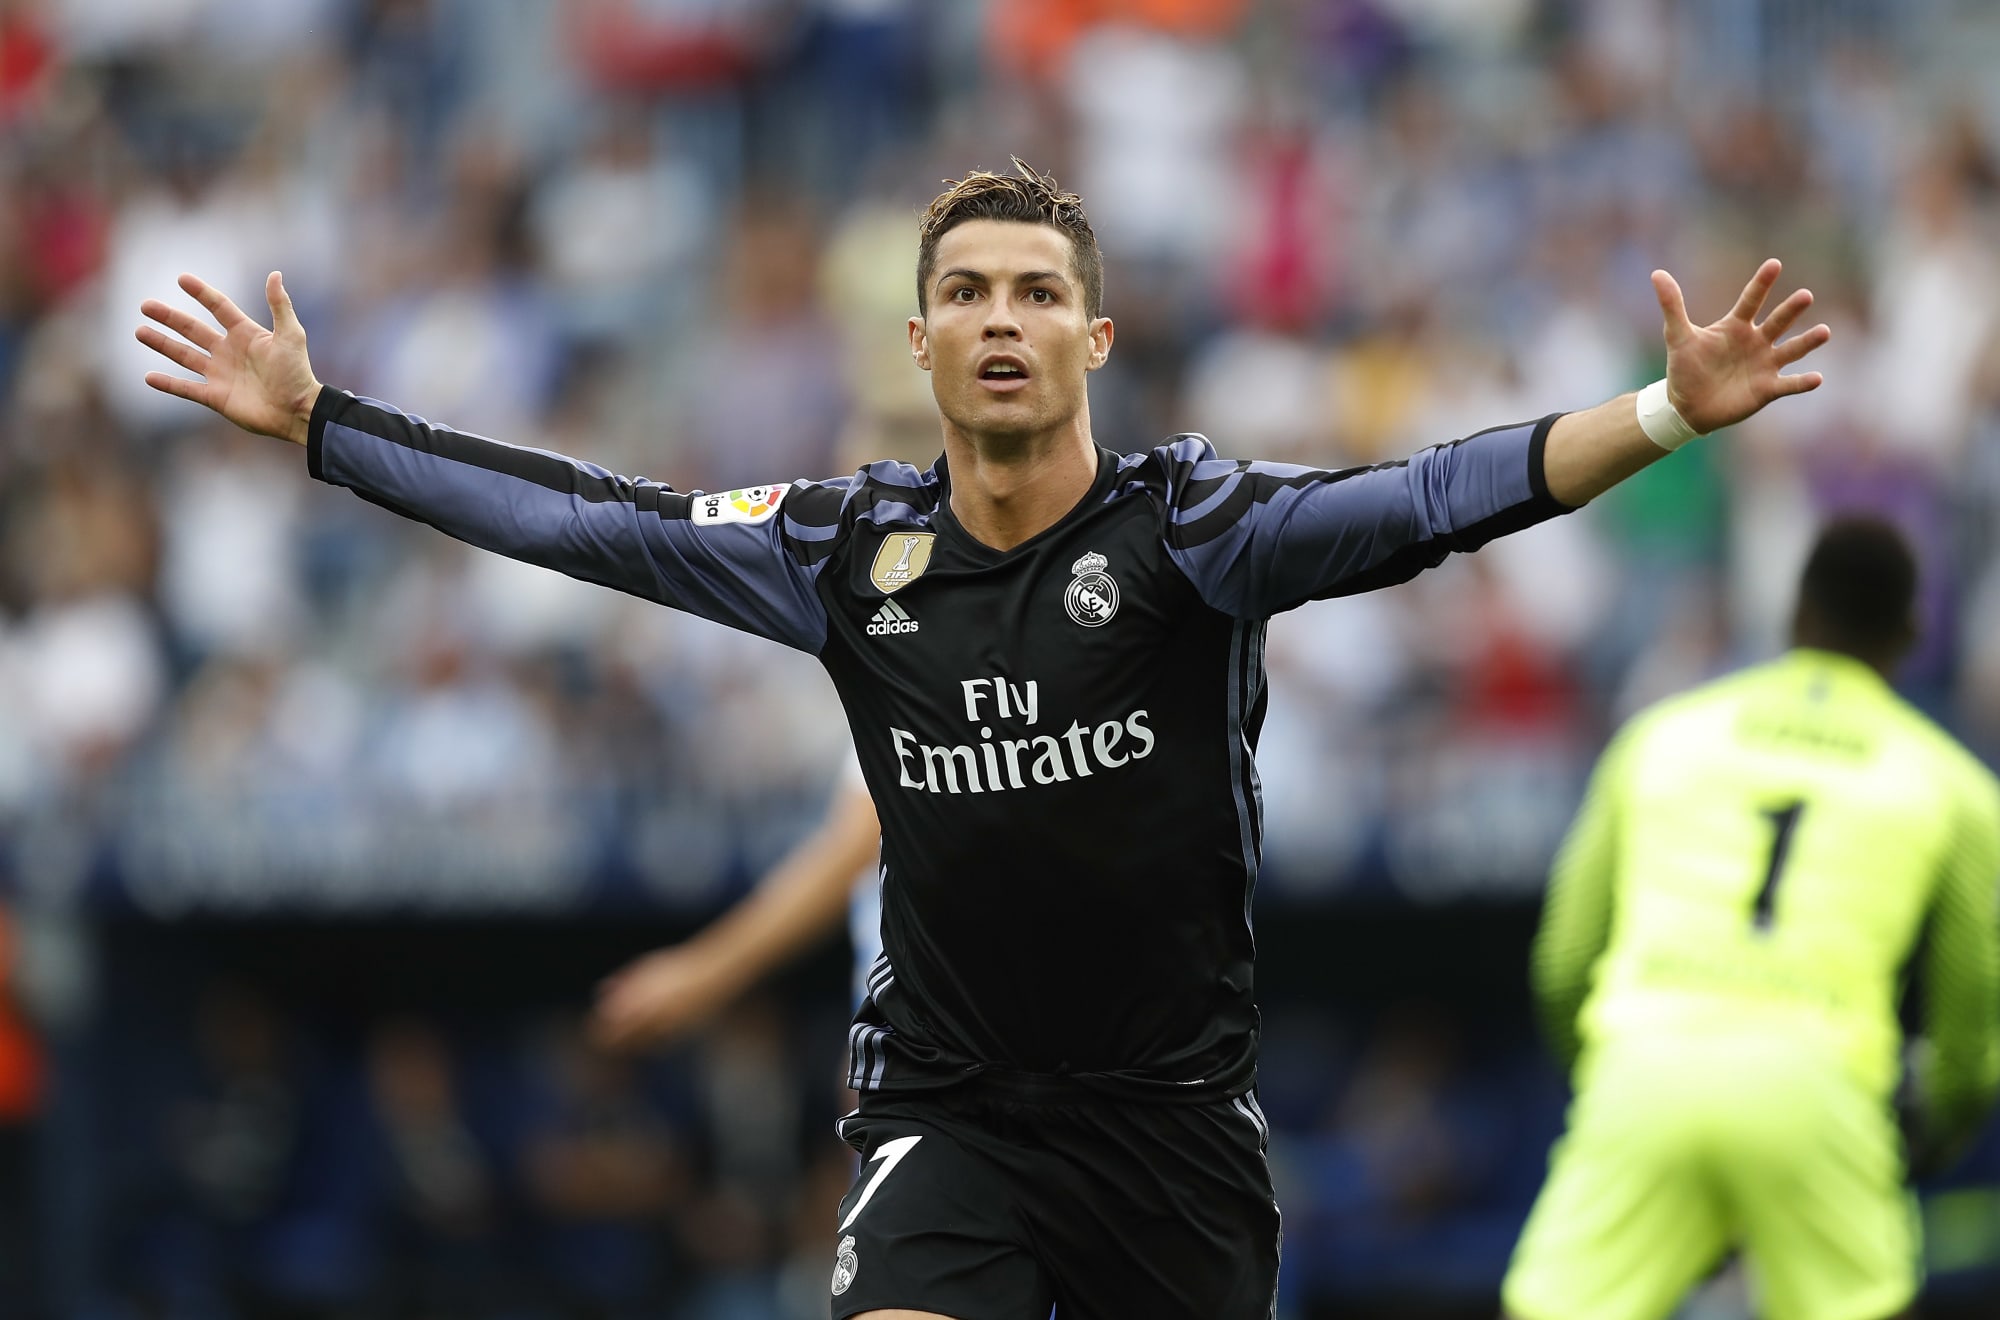 Manchester United should not sweat missing out on Ronaldo